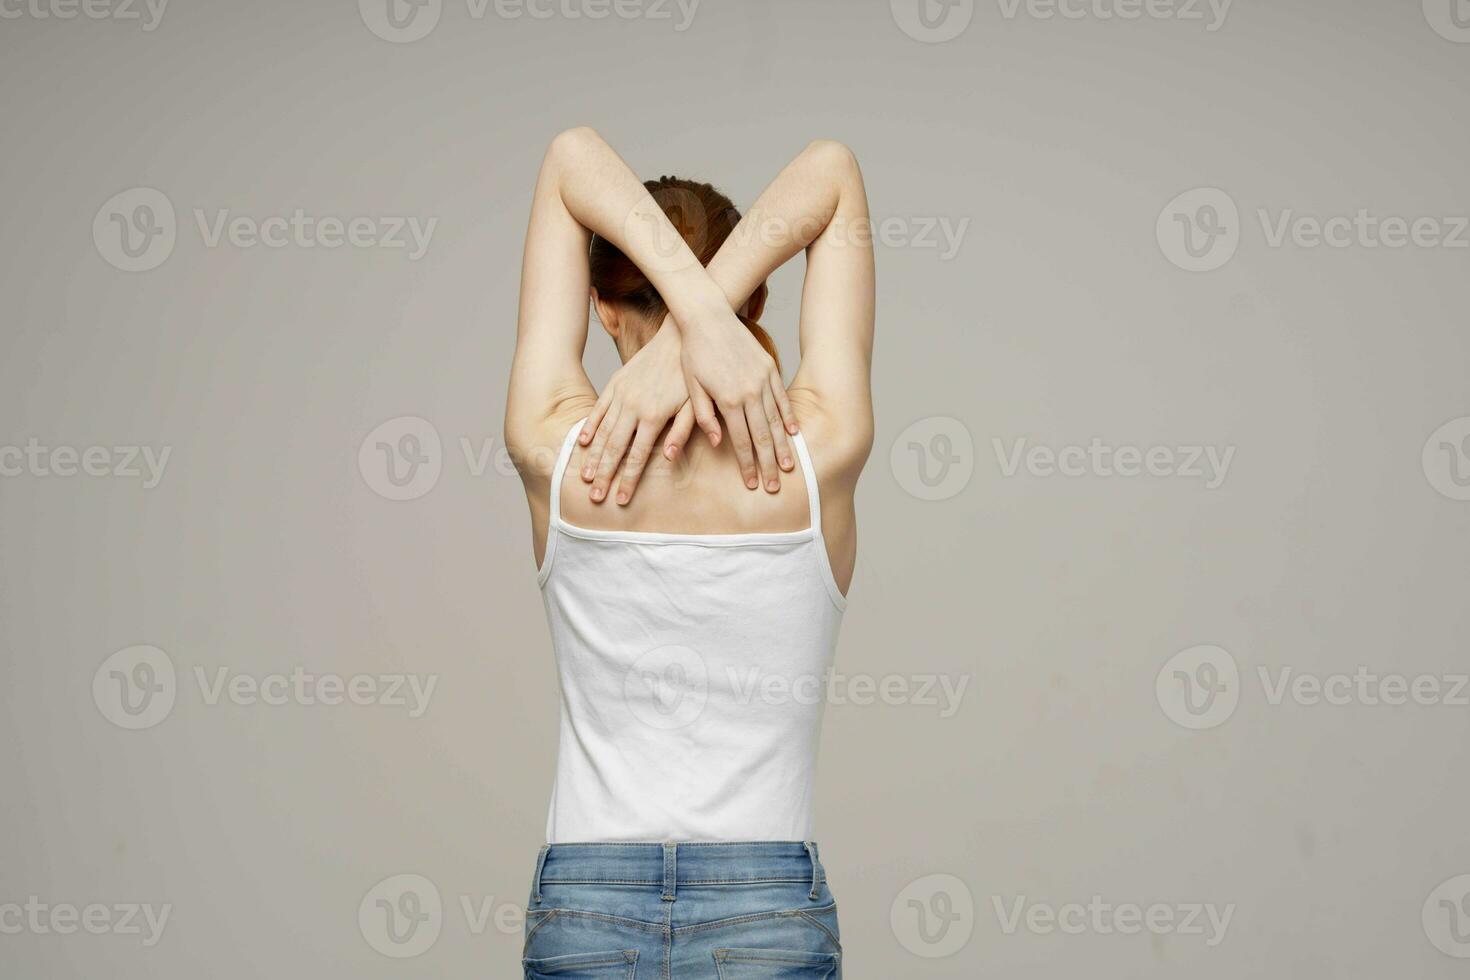 disgruntled woman back pain health problems osteoporosis light background photo